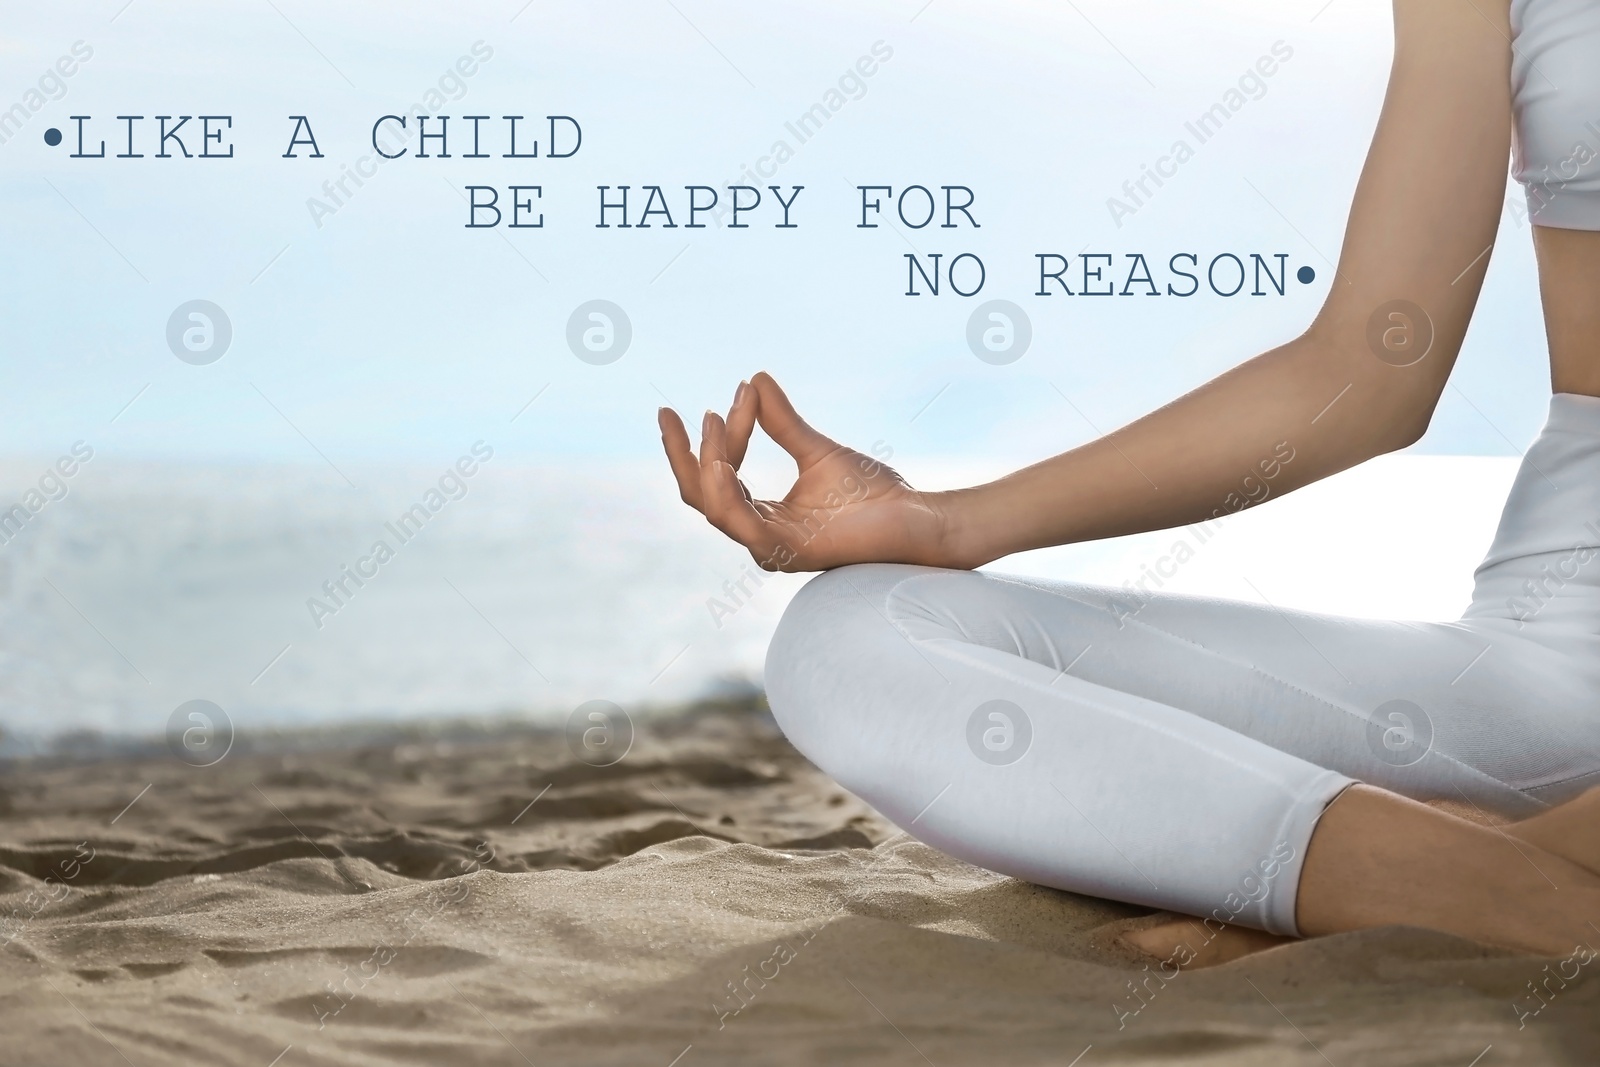 Image of Like A Child, Be Happy For No Reason. Inspirational quote saying that you don't need anything to feel happiness. Text against view of woman meditating on beach, closeup